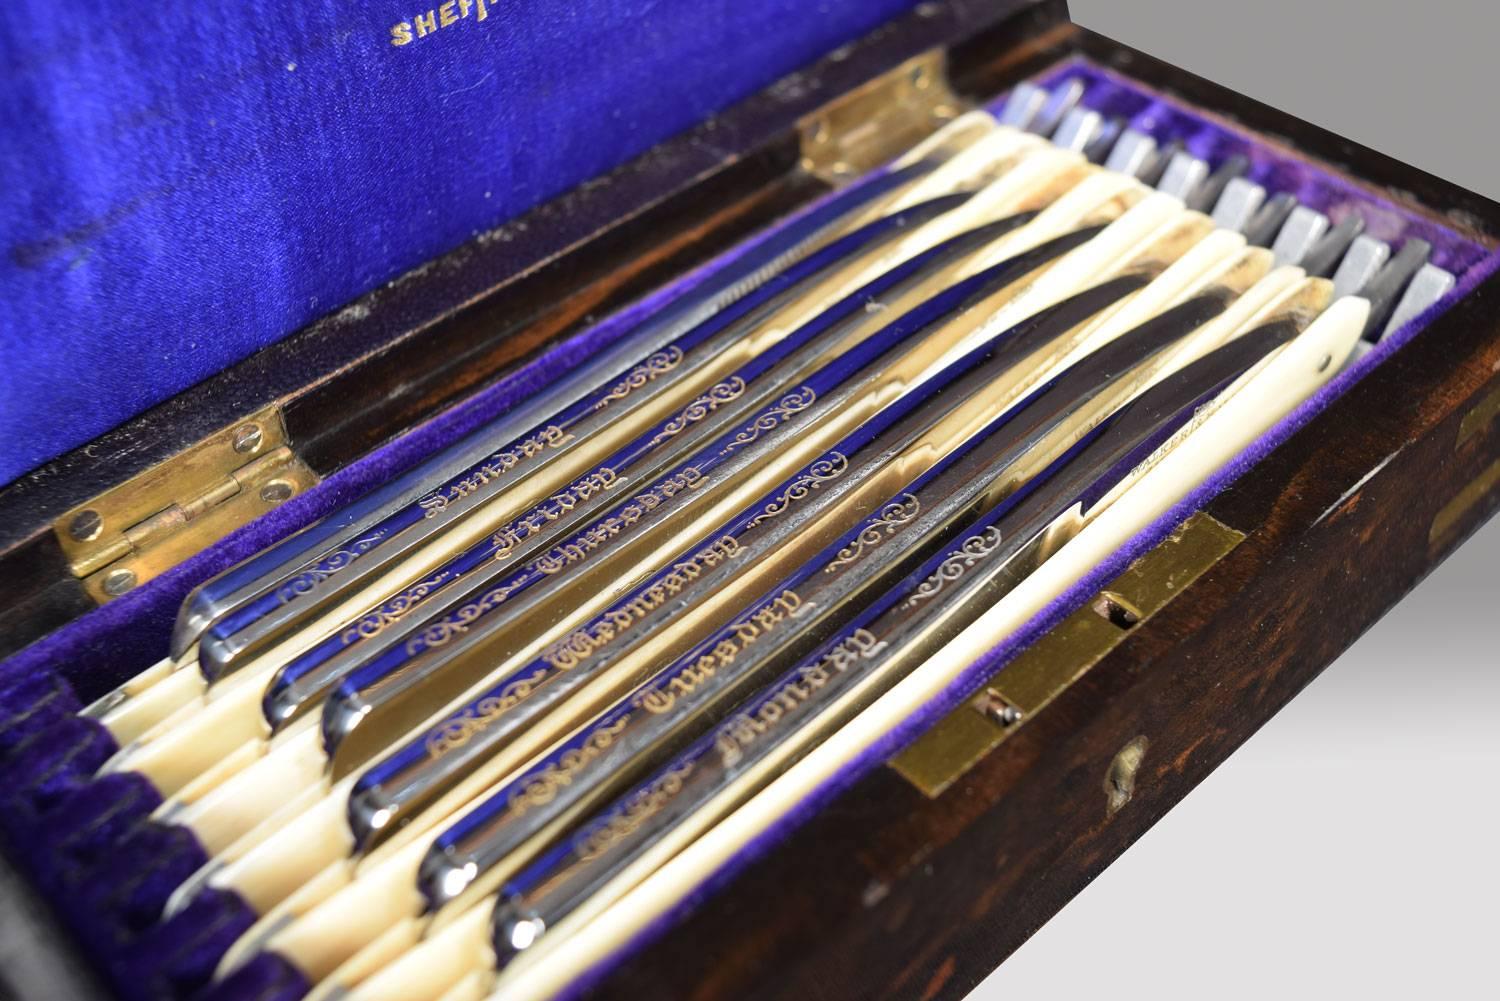 19th century coromandel boxed set of cut throat razors by Walker & Hall of Sheffield, individually marked for different days. One an unmarked replacement.
Dimensions
Height 2 inches
Width 7.5 inches
Depth 3.5 inches.